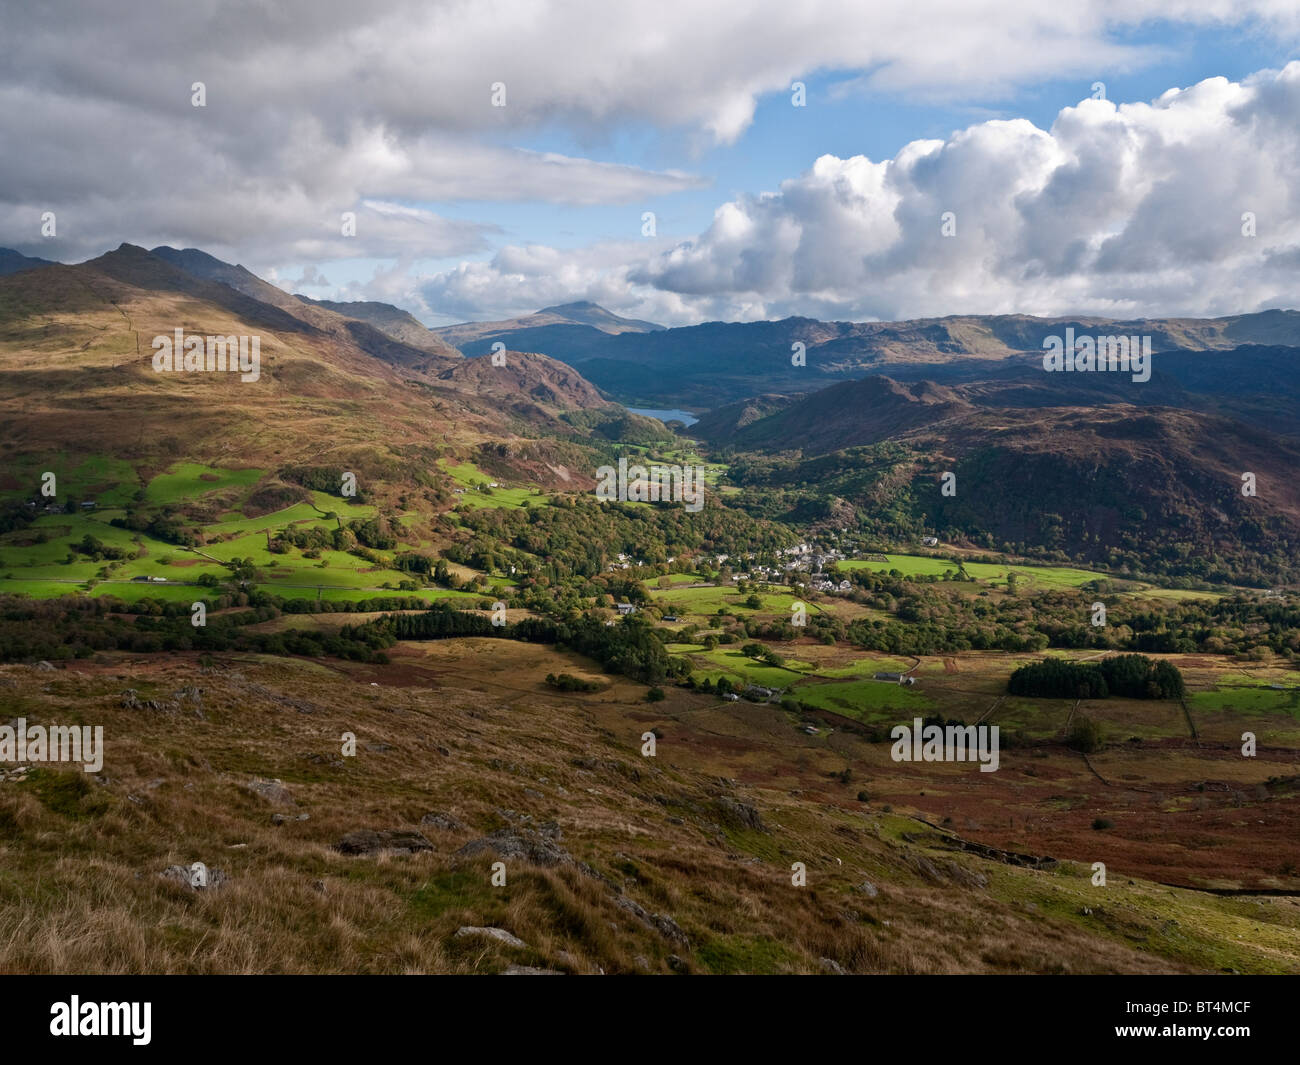 The village of Beddgelert in Nantgwynant, Snowdonia viewed from the slopes of Moel Hebog. Moel Siabod and Llyn Dinas are in view Stock Photo